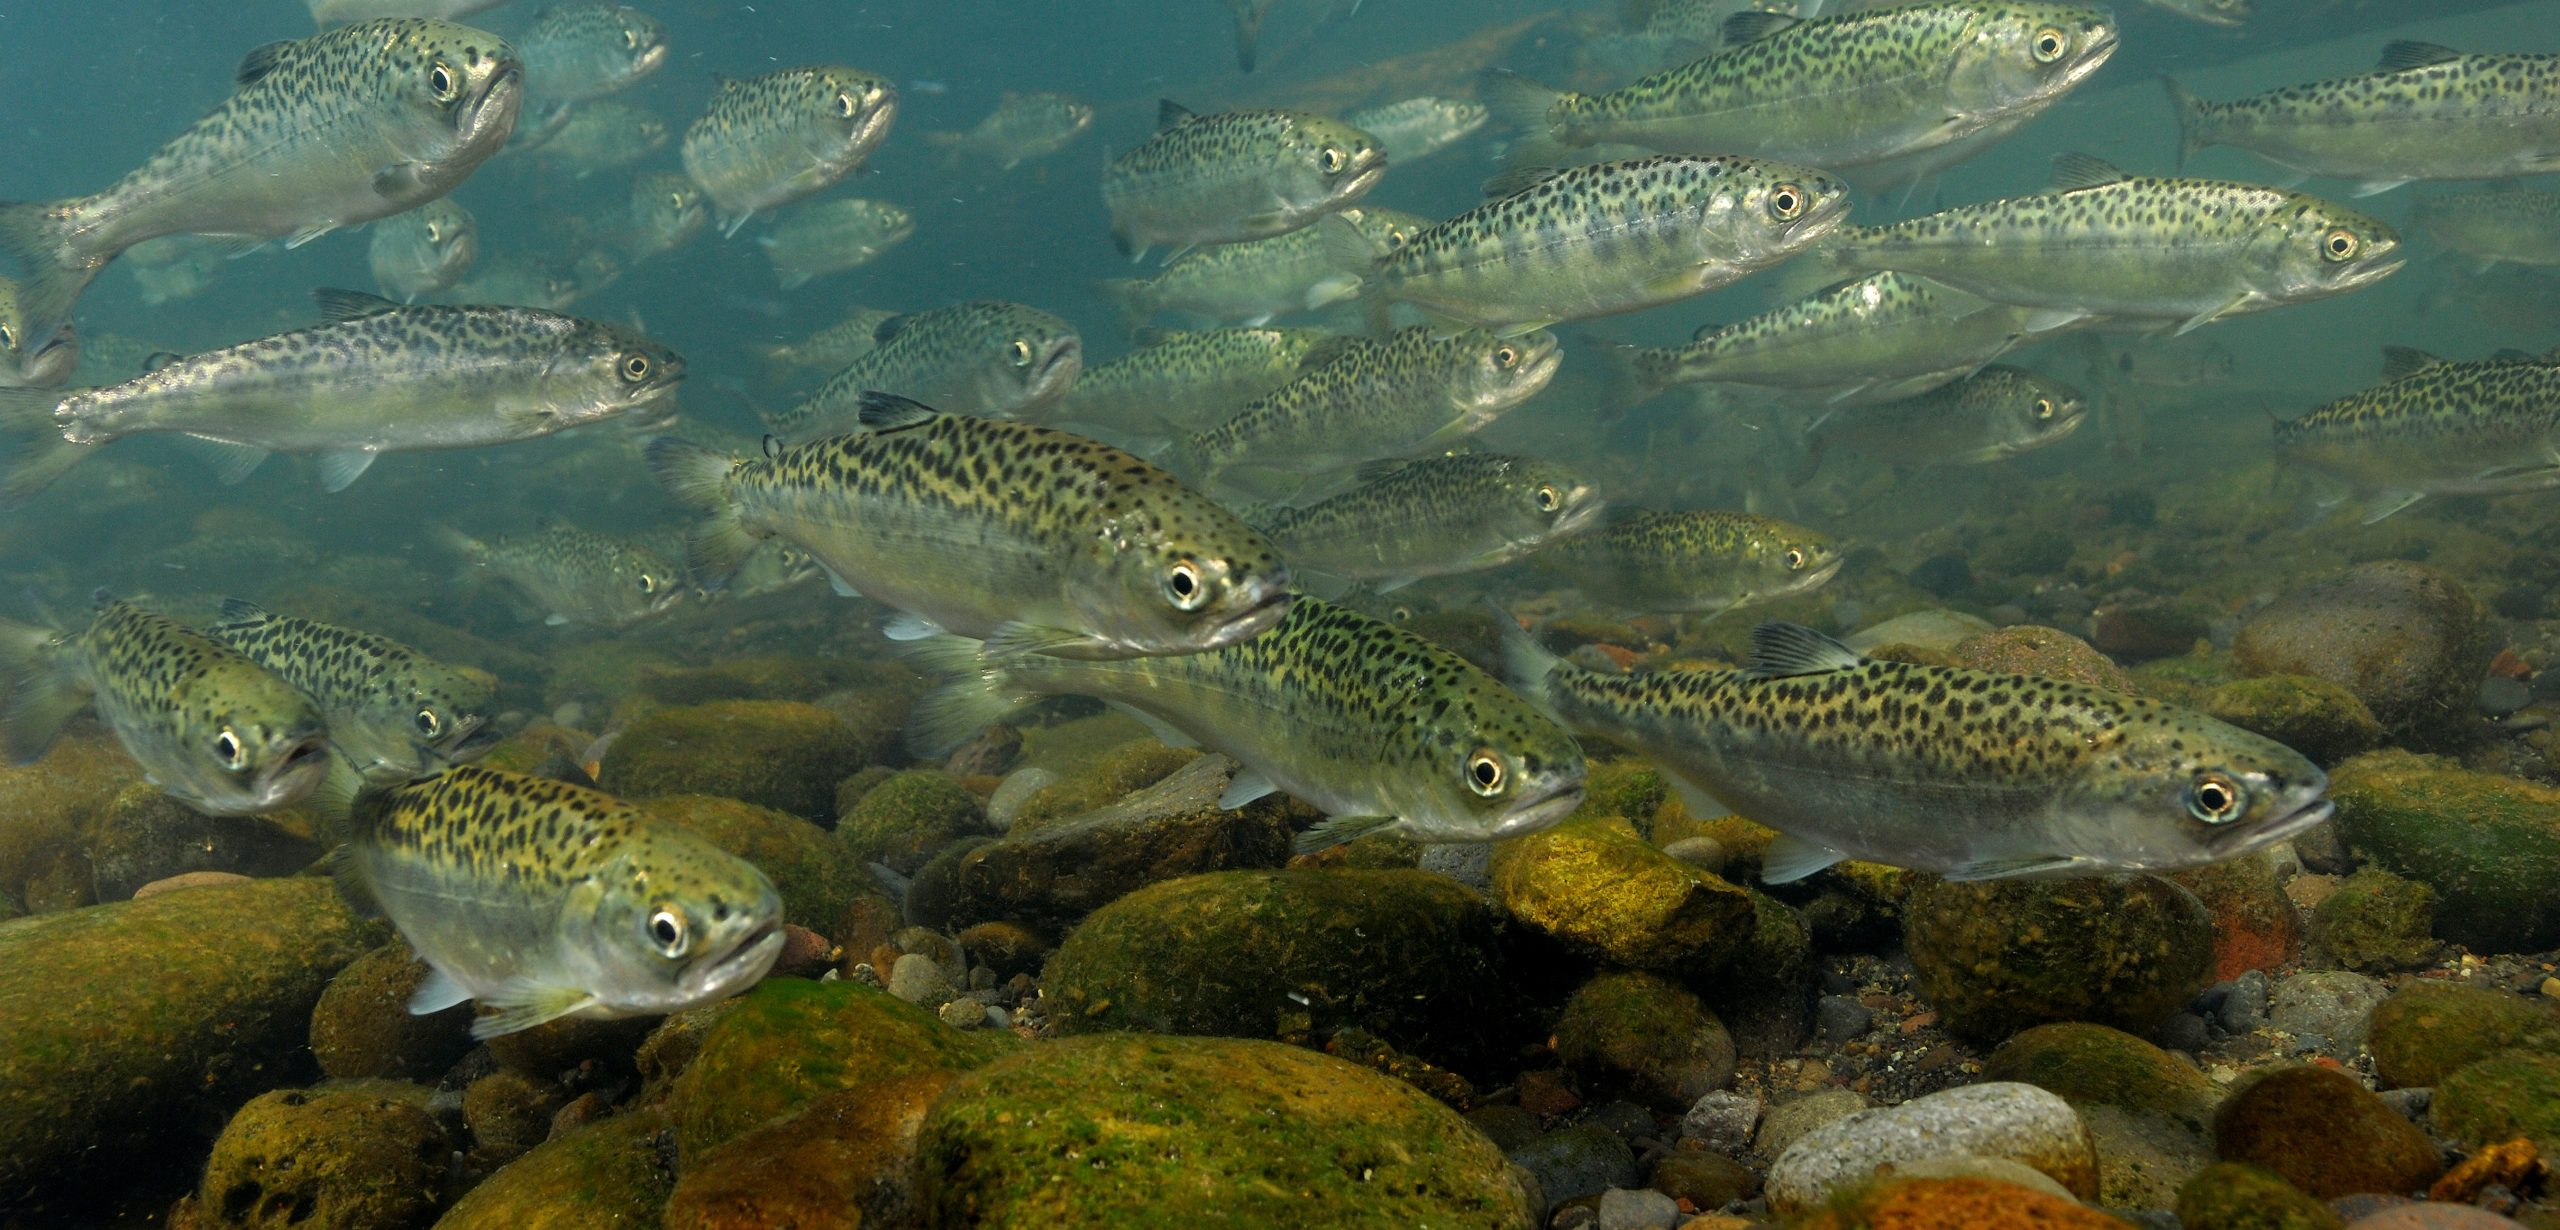 Young chinook salmon, with their highly active lifestyles, seem to be more exposed to contaminants than less active sculpin. Photo by Mark Conlin/SuperStock/Corbis